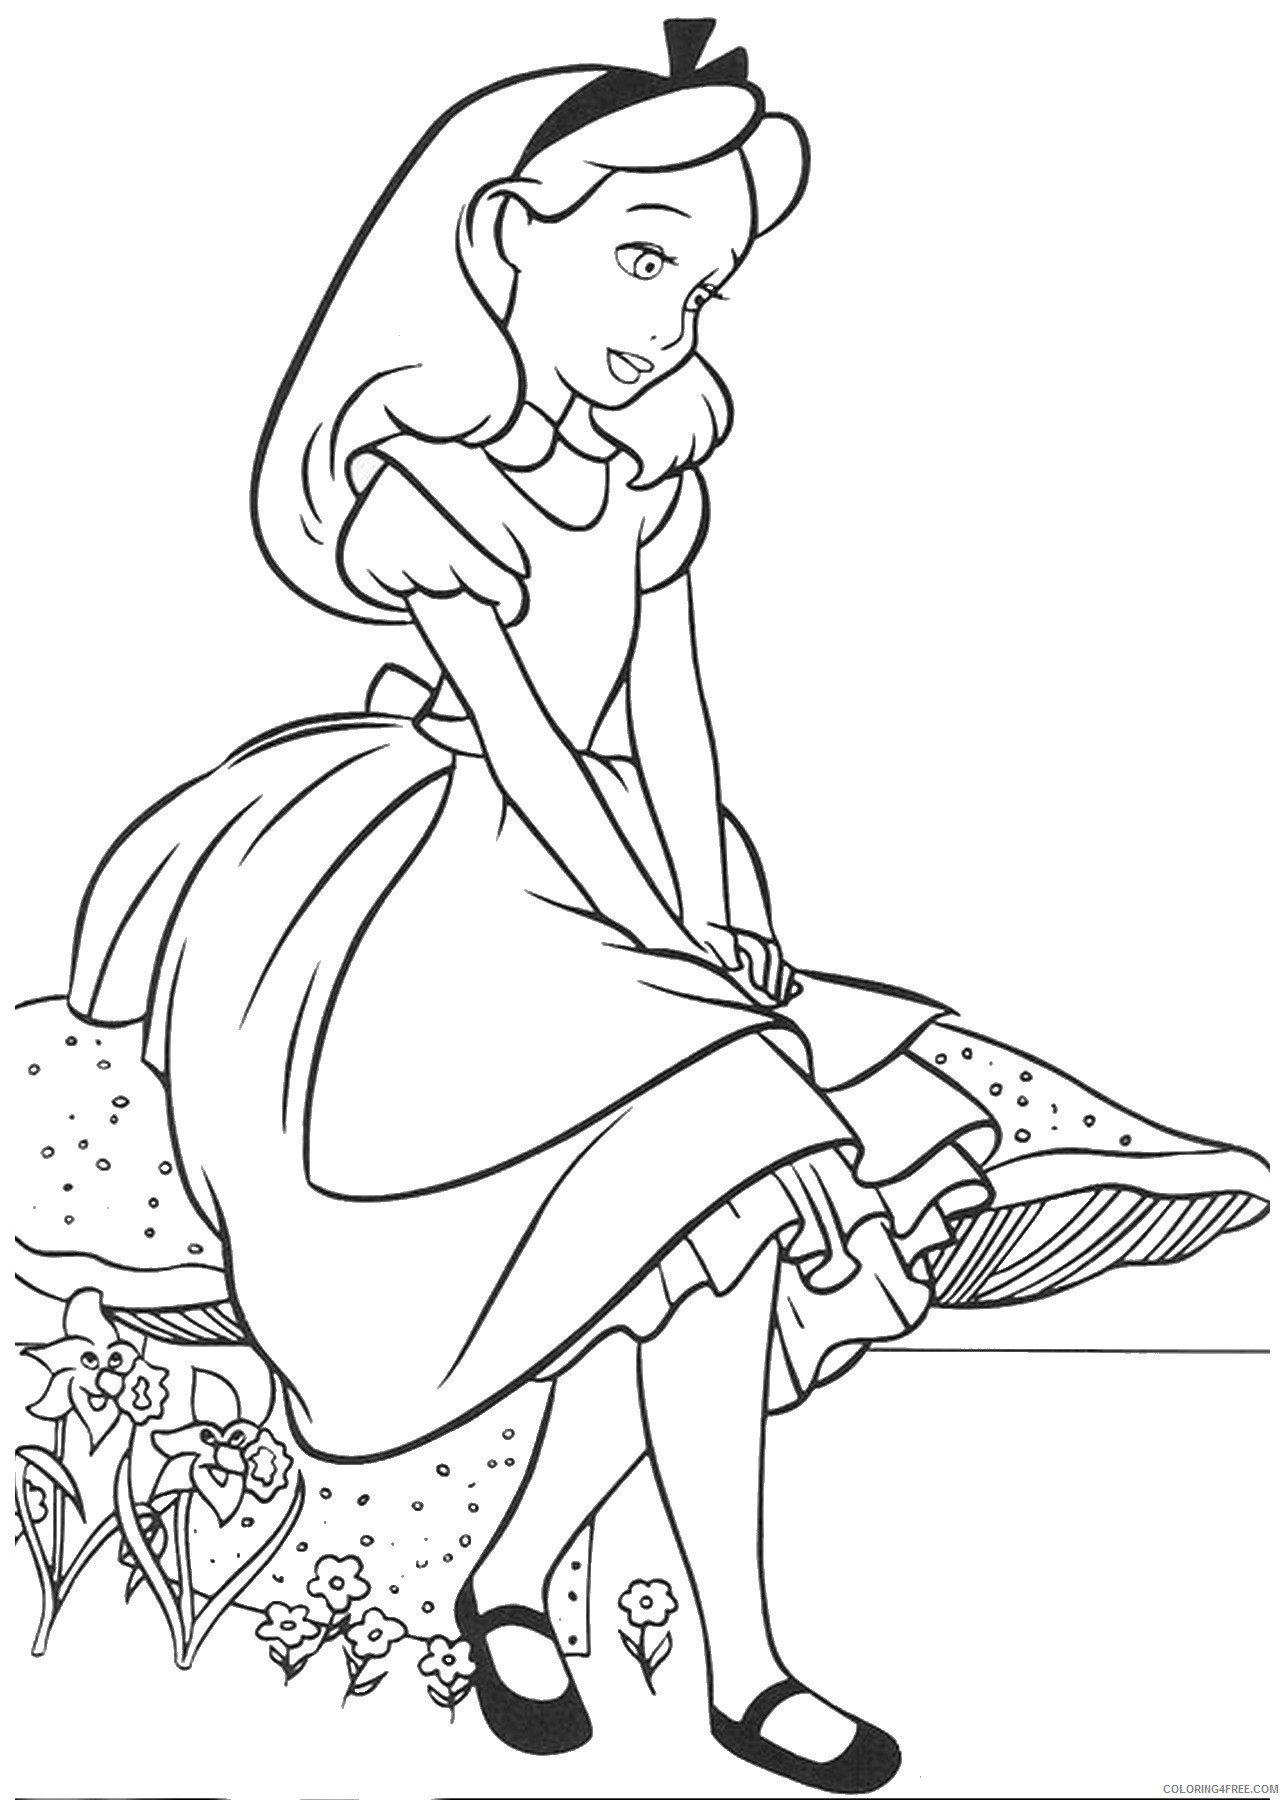 Alice in Wonderland Coloring Pages Cartoons alice_11 Printable 2020 0351 Coloring4free